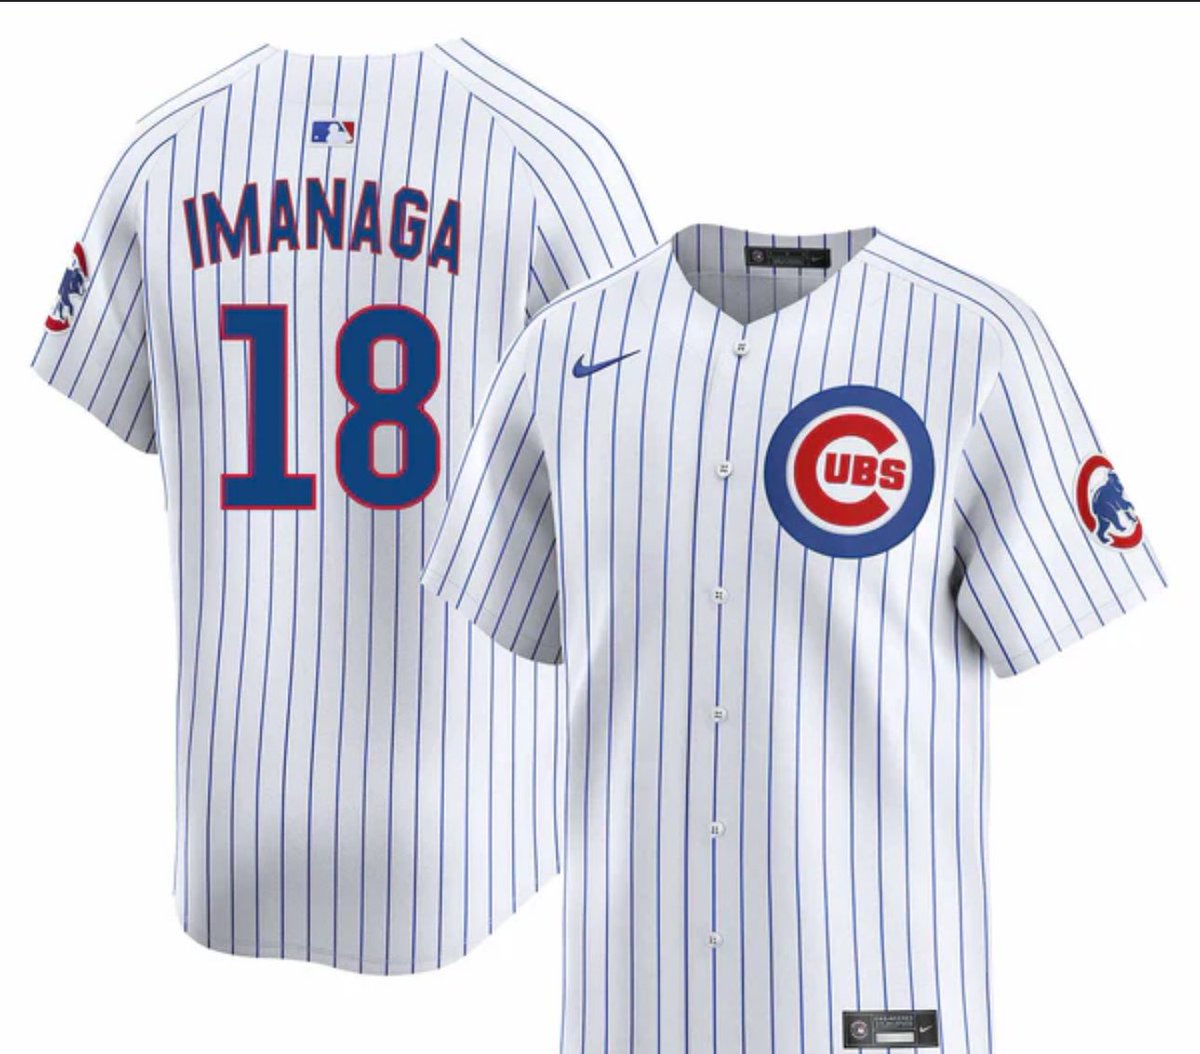 🚨SHOTA IMANAGA JERSEY GIVEAWAY To celebrate the 5-0, MLB leader in ERA, we’re giving away his jersey To enter: -Follow @JAYChiCubs -Like & RT this tweet -Comment 🐻 Winner announced Sunday! *Make sure it’s us if you win*